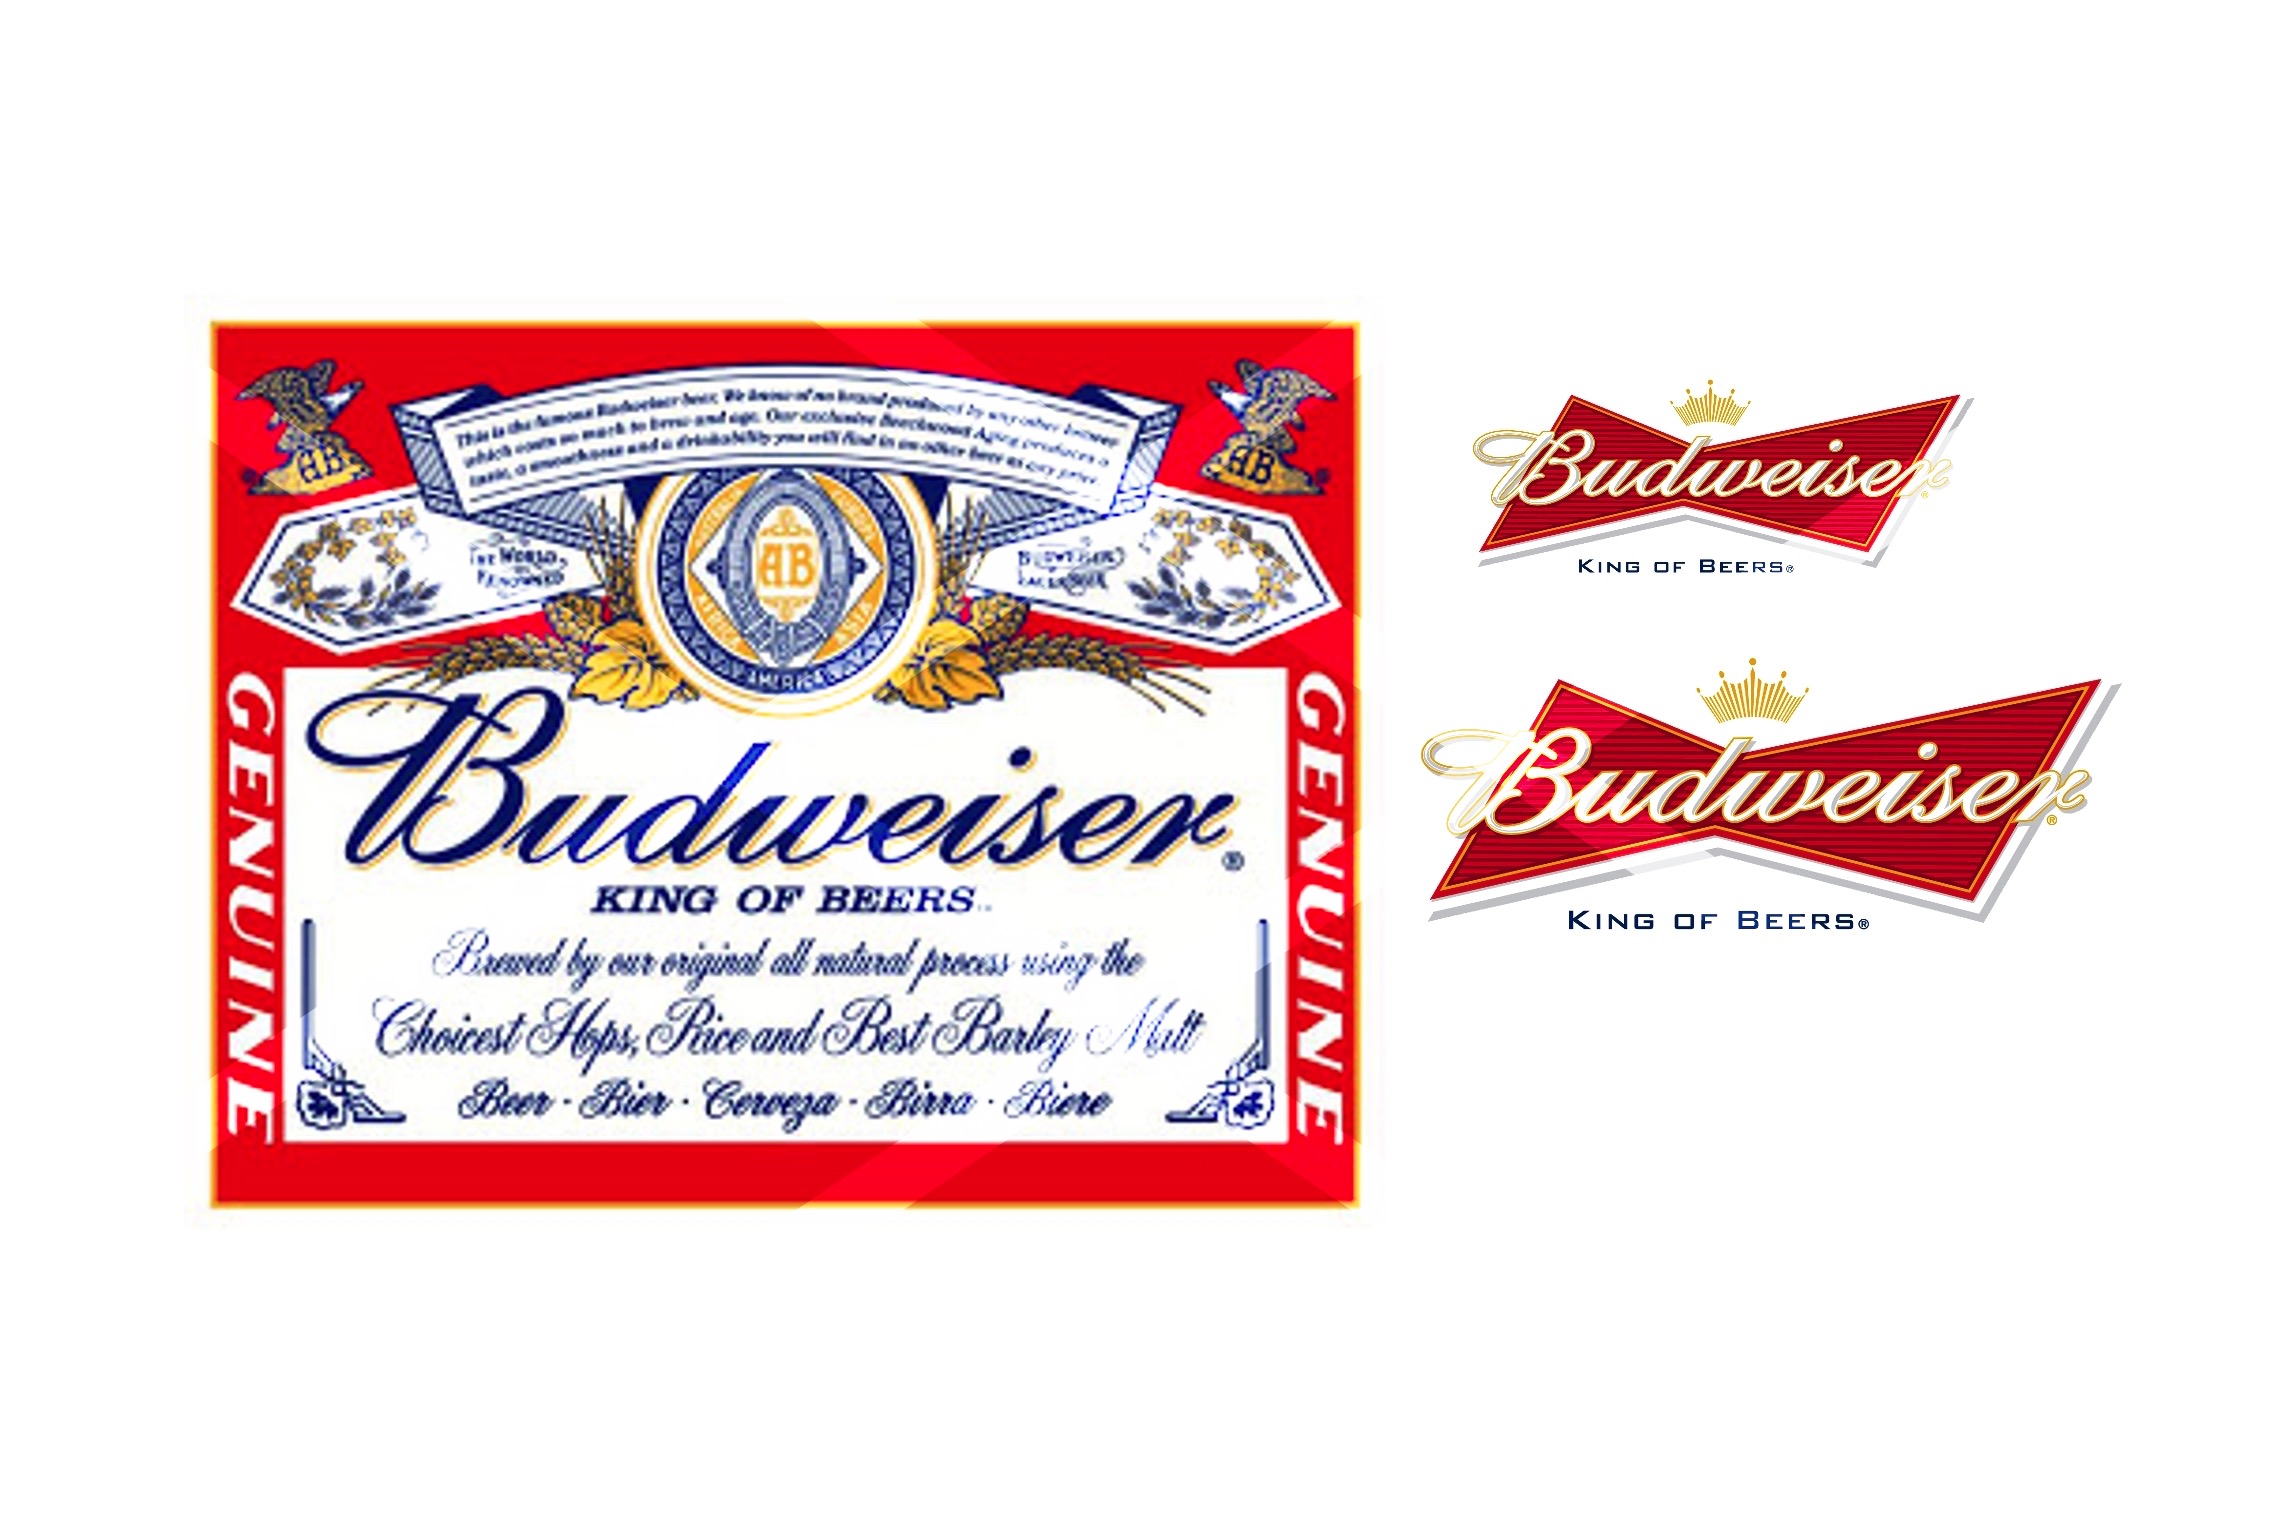 Budweiser beer can/bottle labels cake topper and matching cupcake toppers